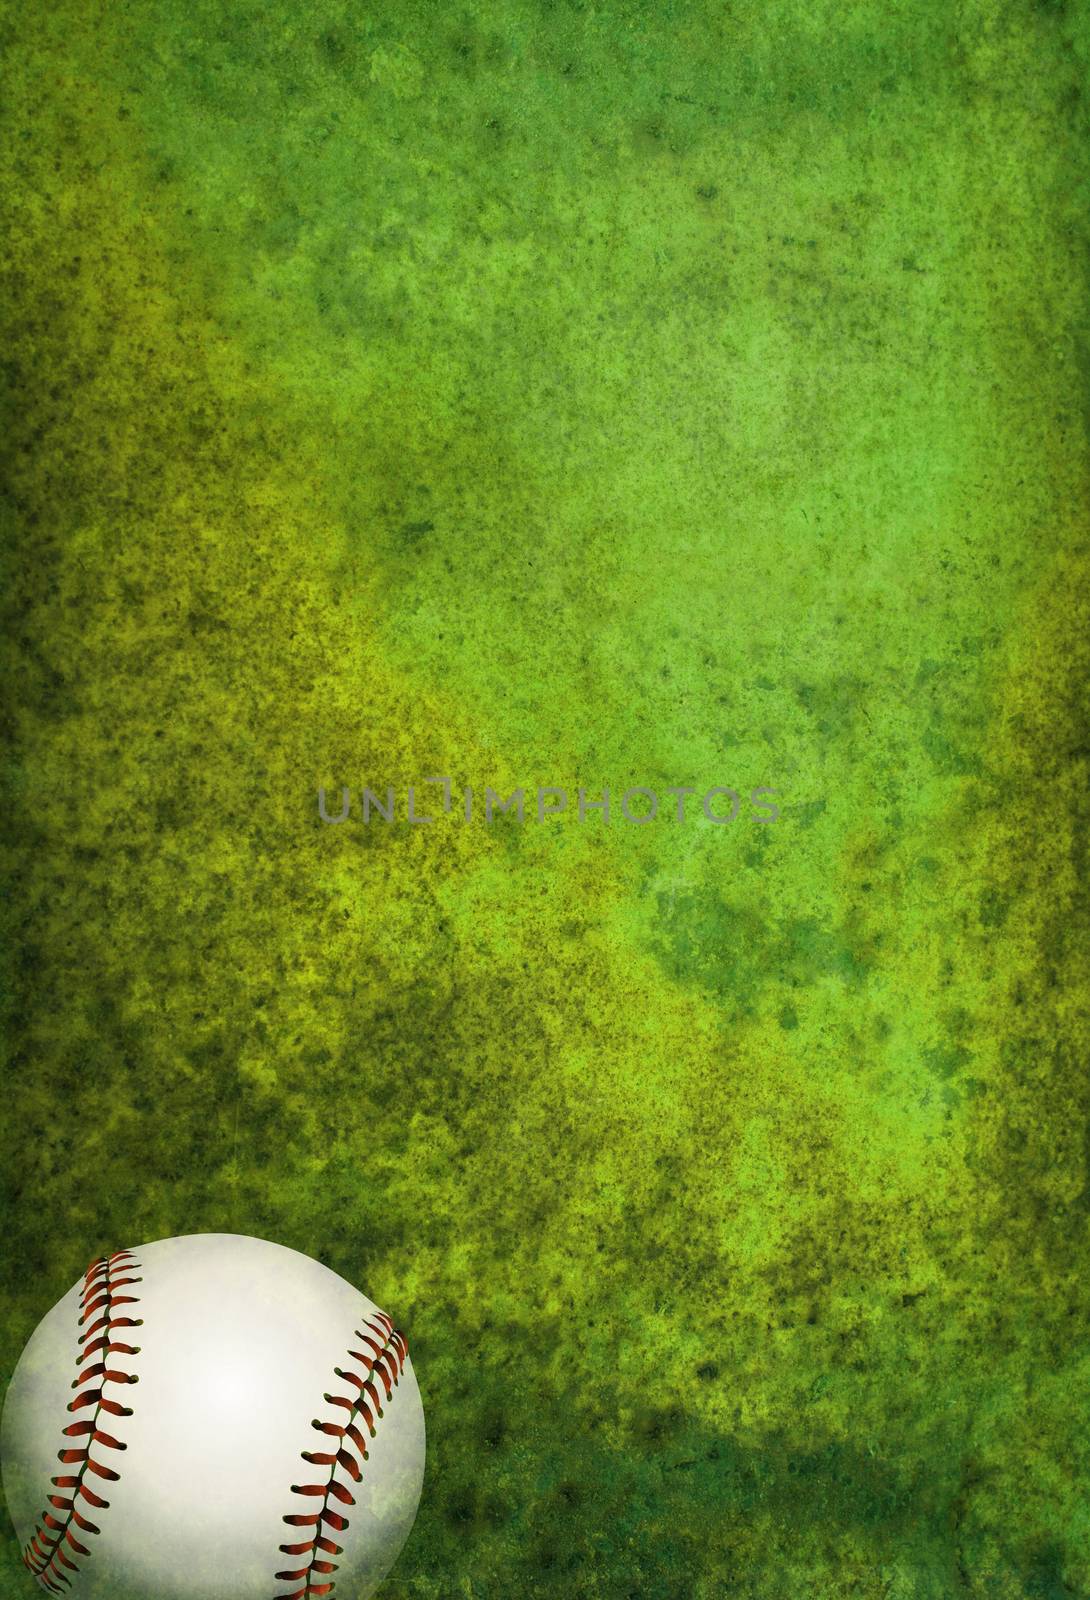 A green textured baseball field background with ball. Room for copy.